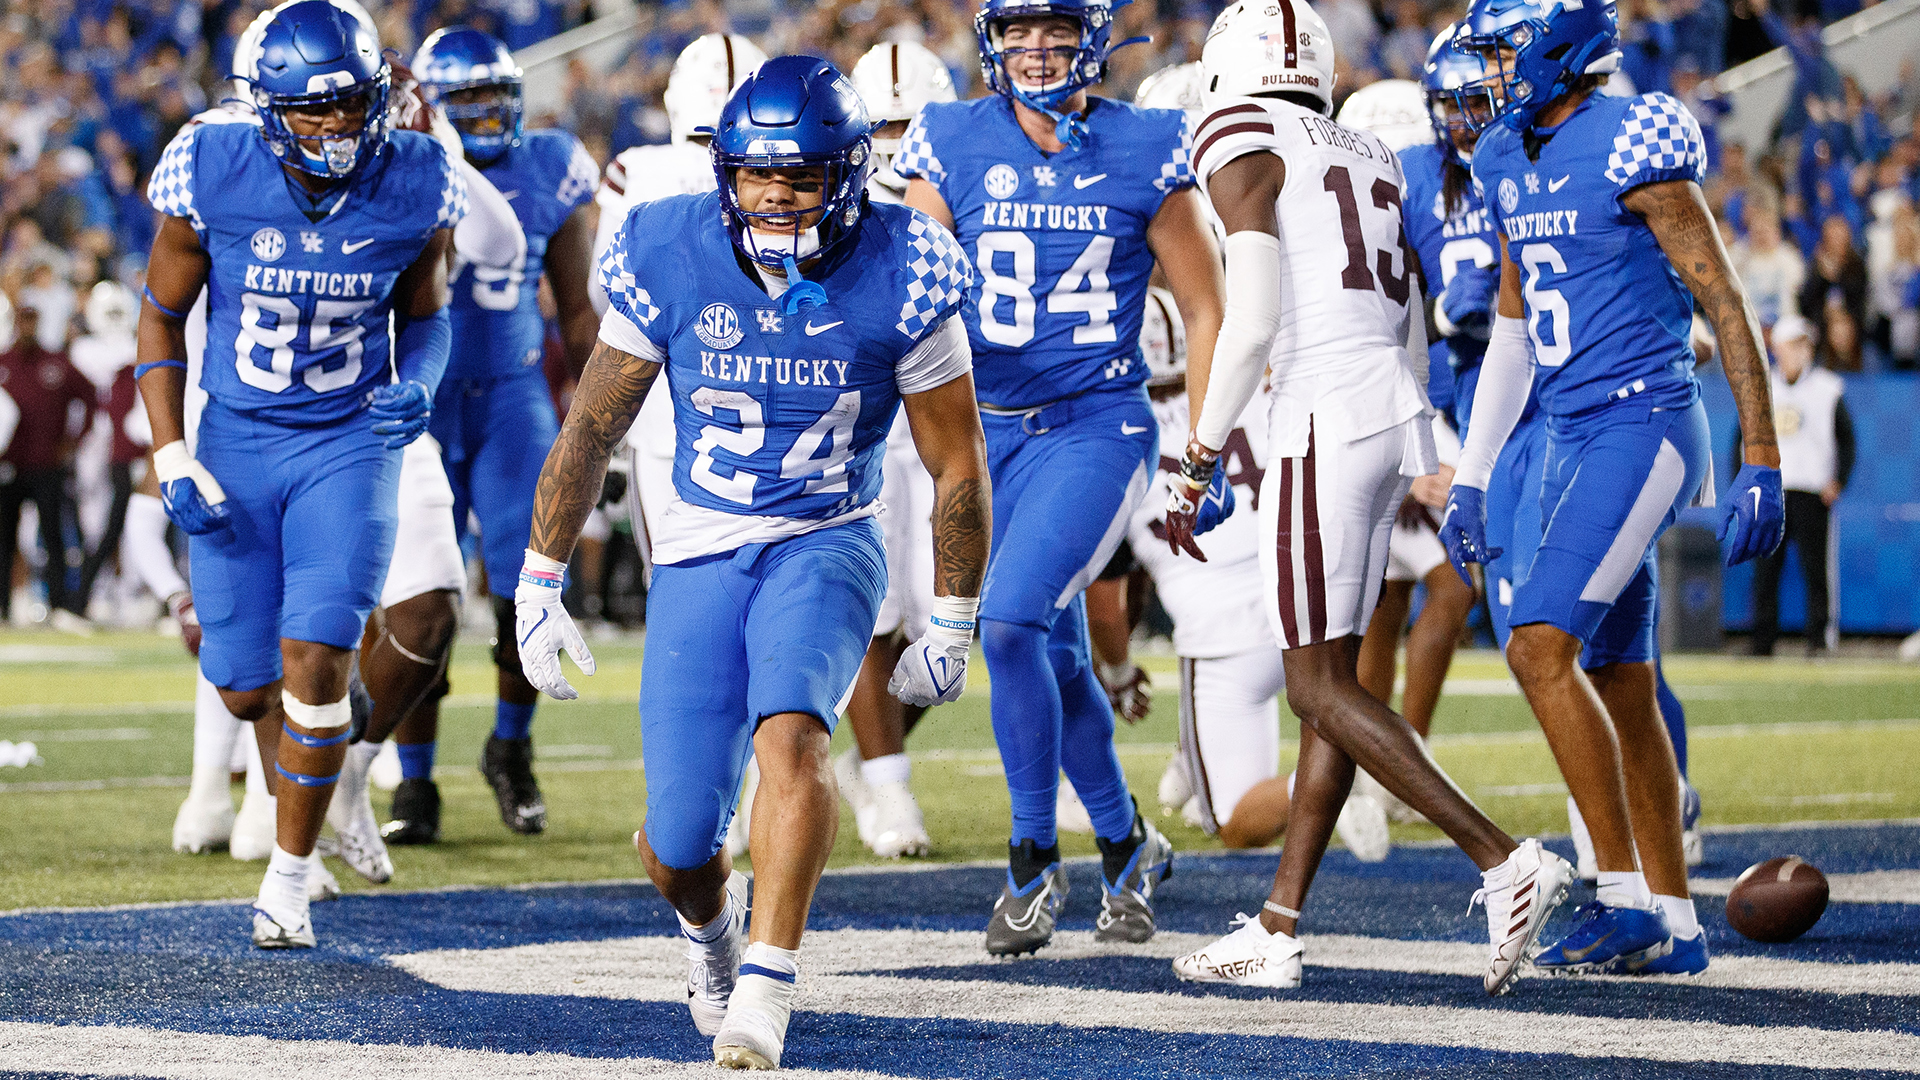 Chris Rodriguez Jr. Leads No. 22 Kentucky Past No. 16 Mississippi State